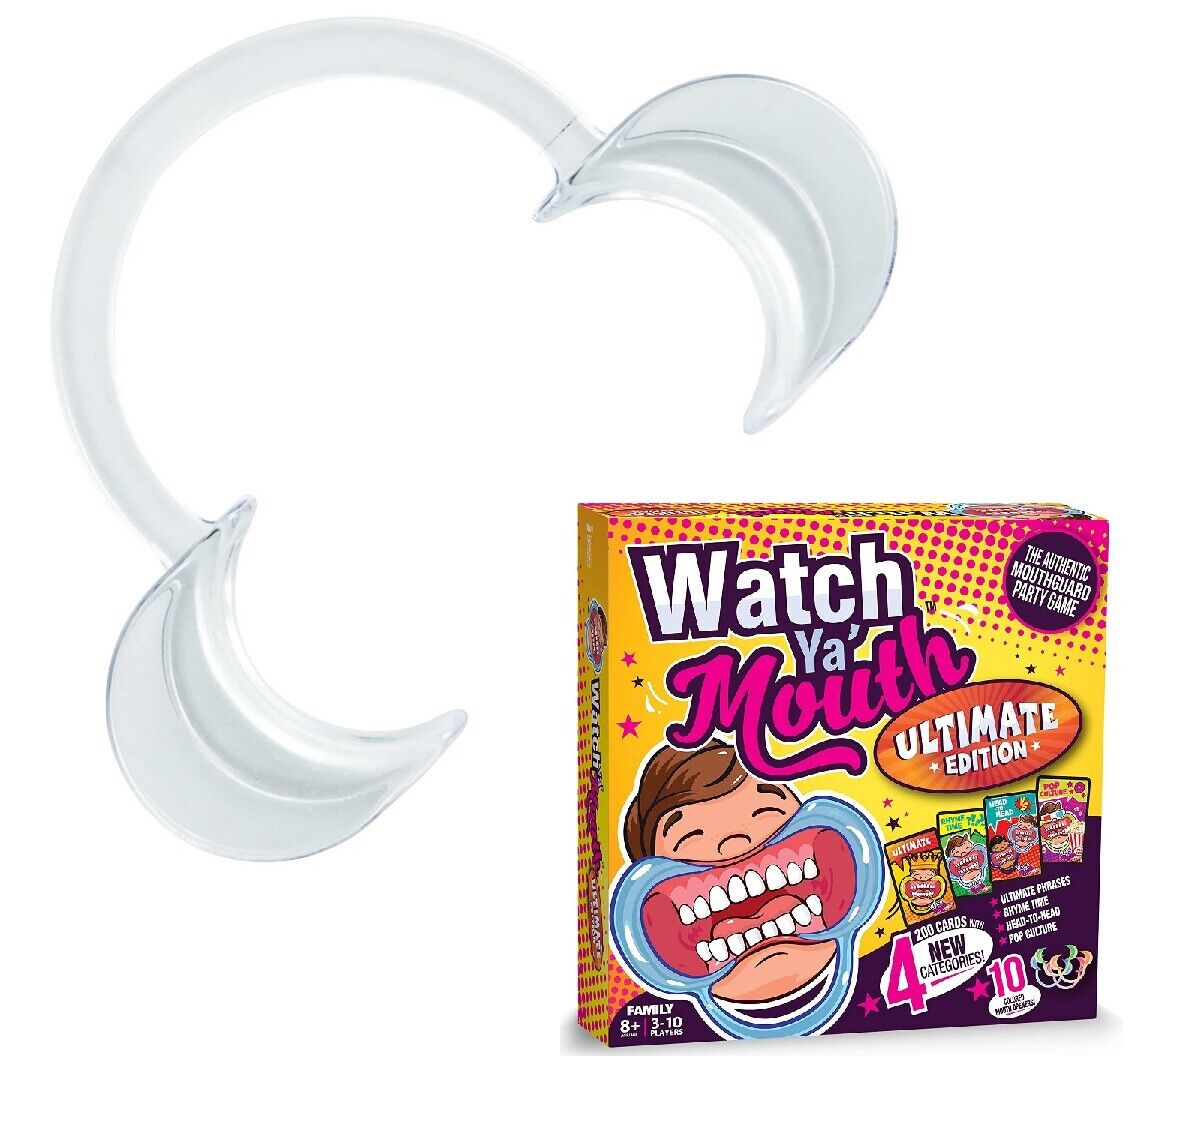 Bag of 20 Watch Ya' Mouth Medium Cheek Retractors for Game, Guards Pieces MyDDSSupply Does not apply